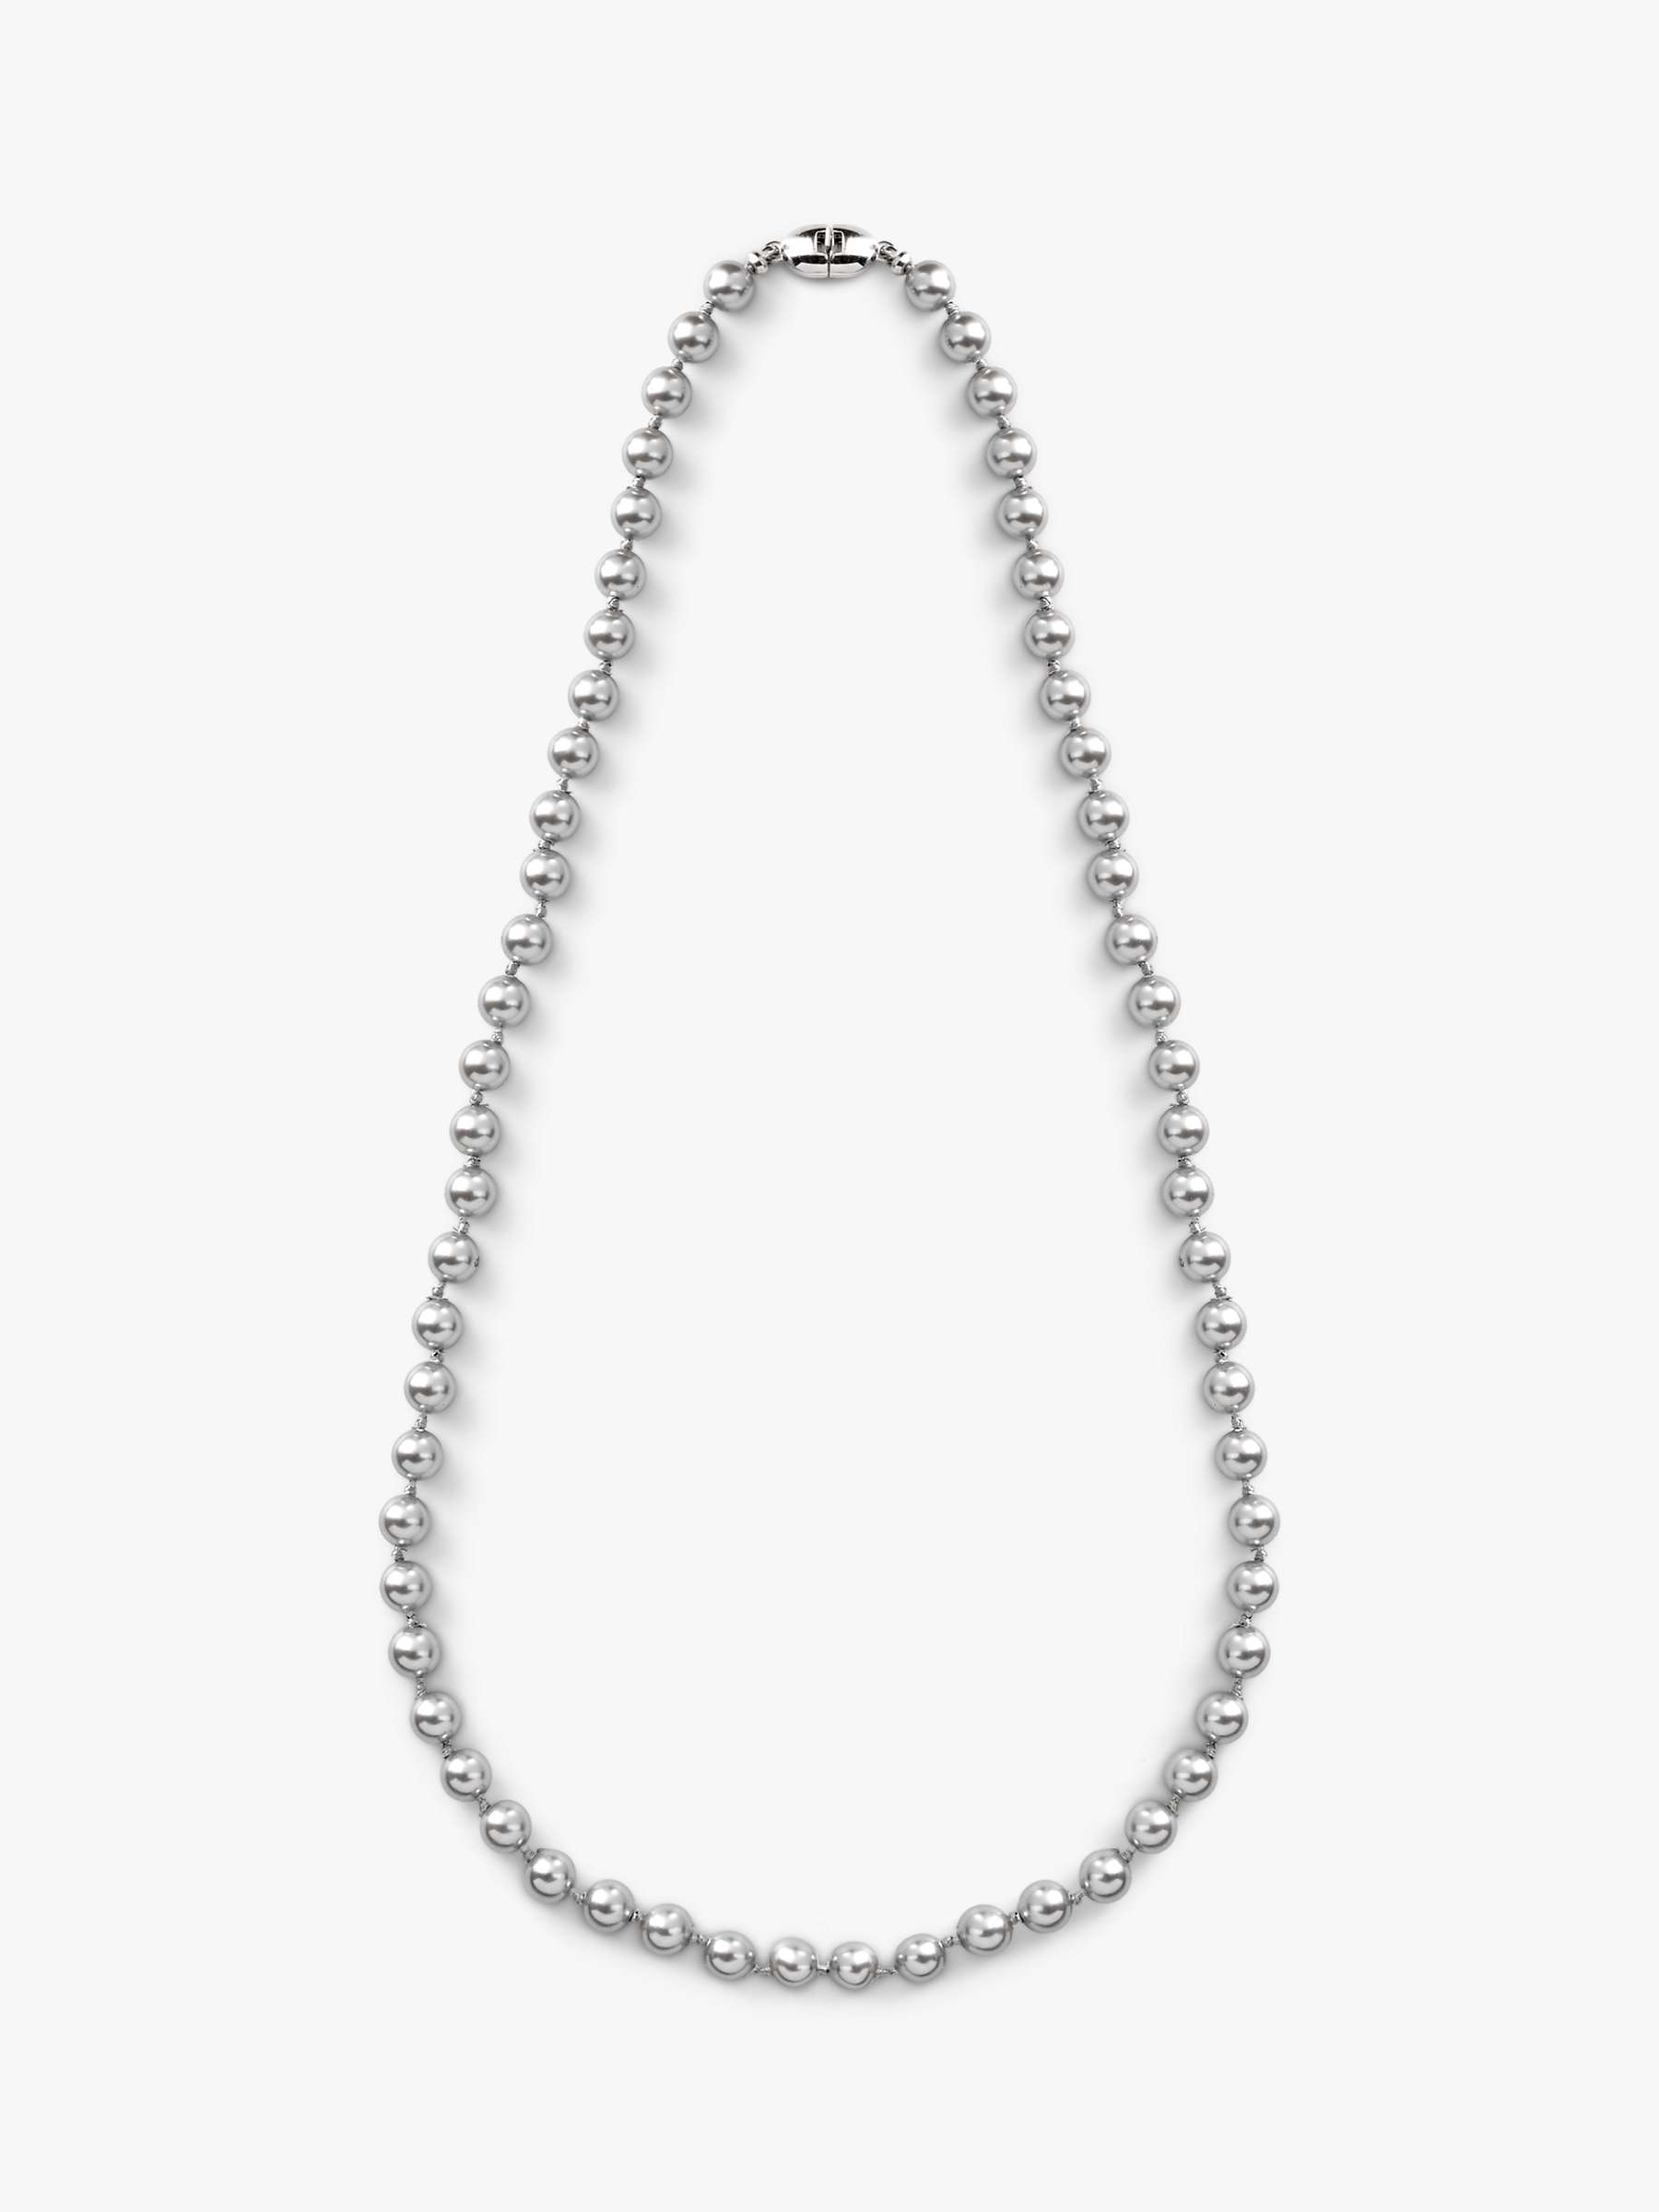 Buy Eclectica Vintage Monet Single Row Faux Pearl Necklace, Dated Circa 1980s Online at johnlewis.com